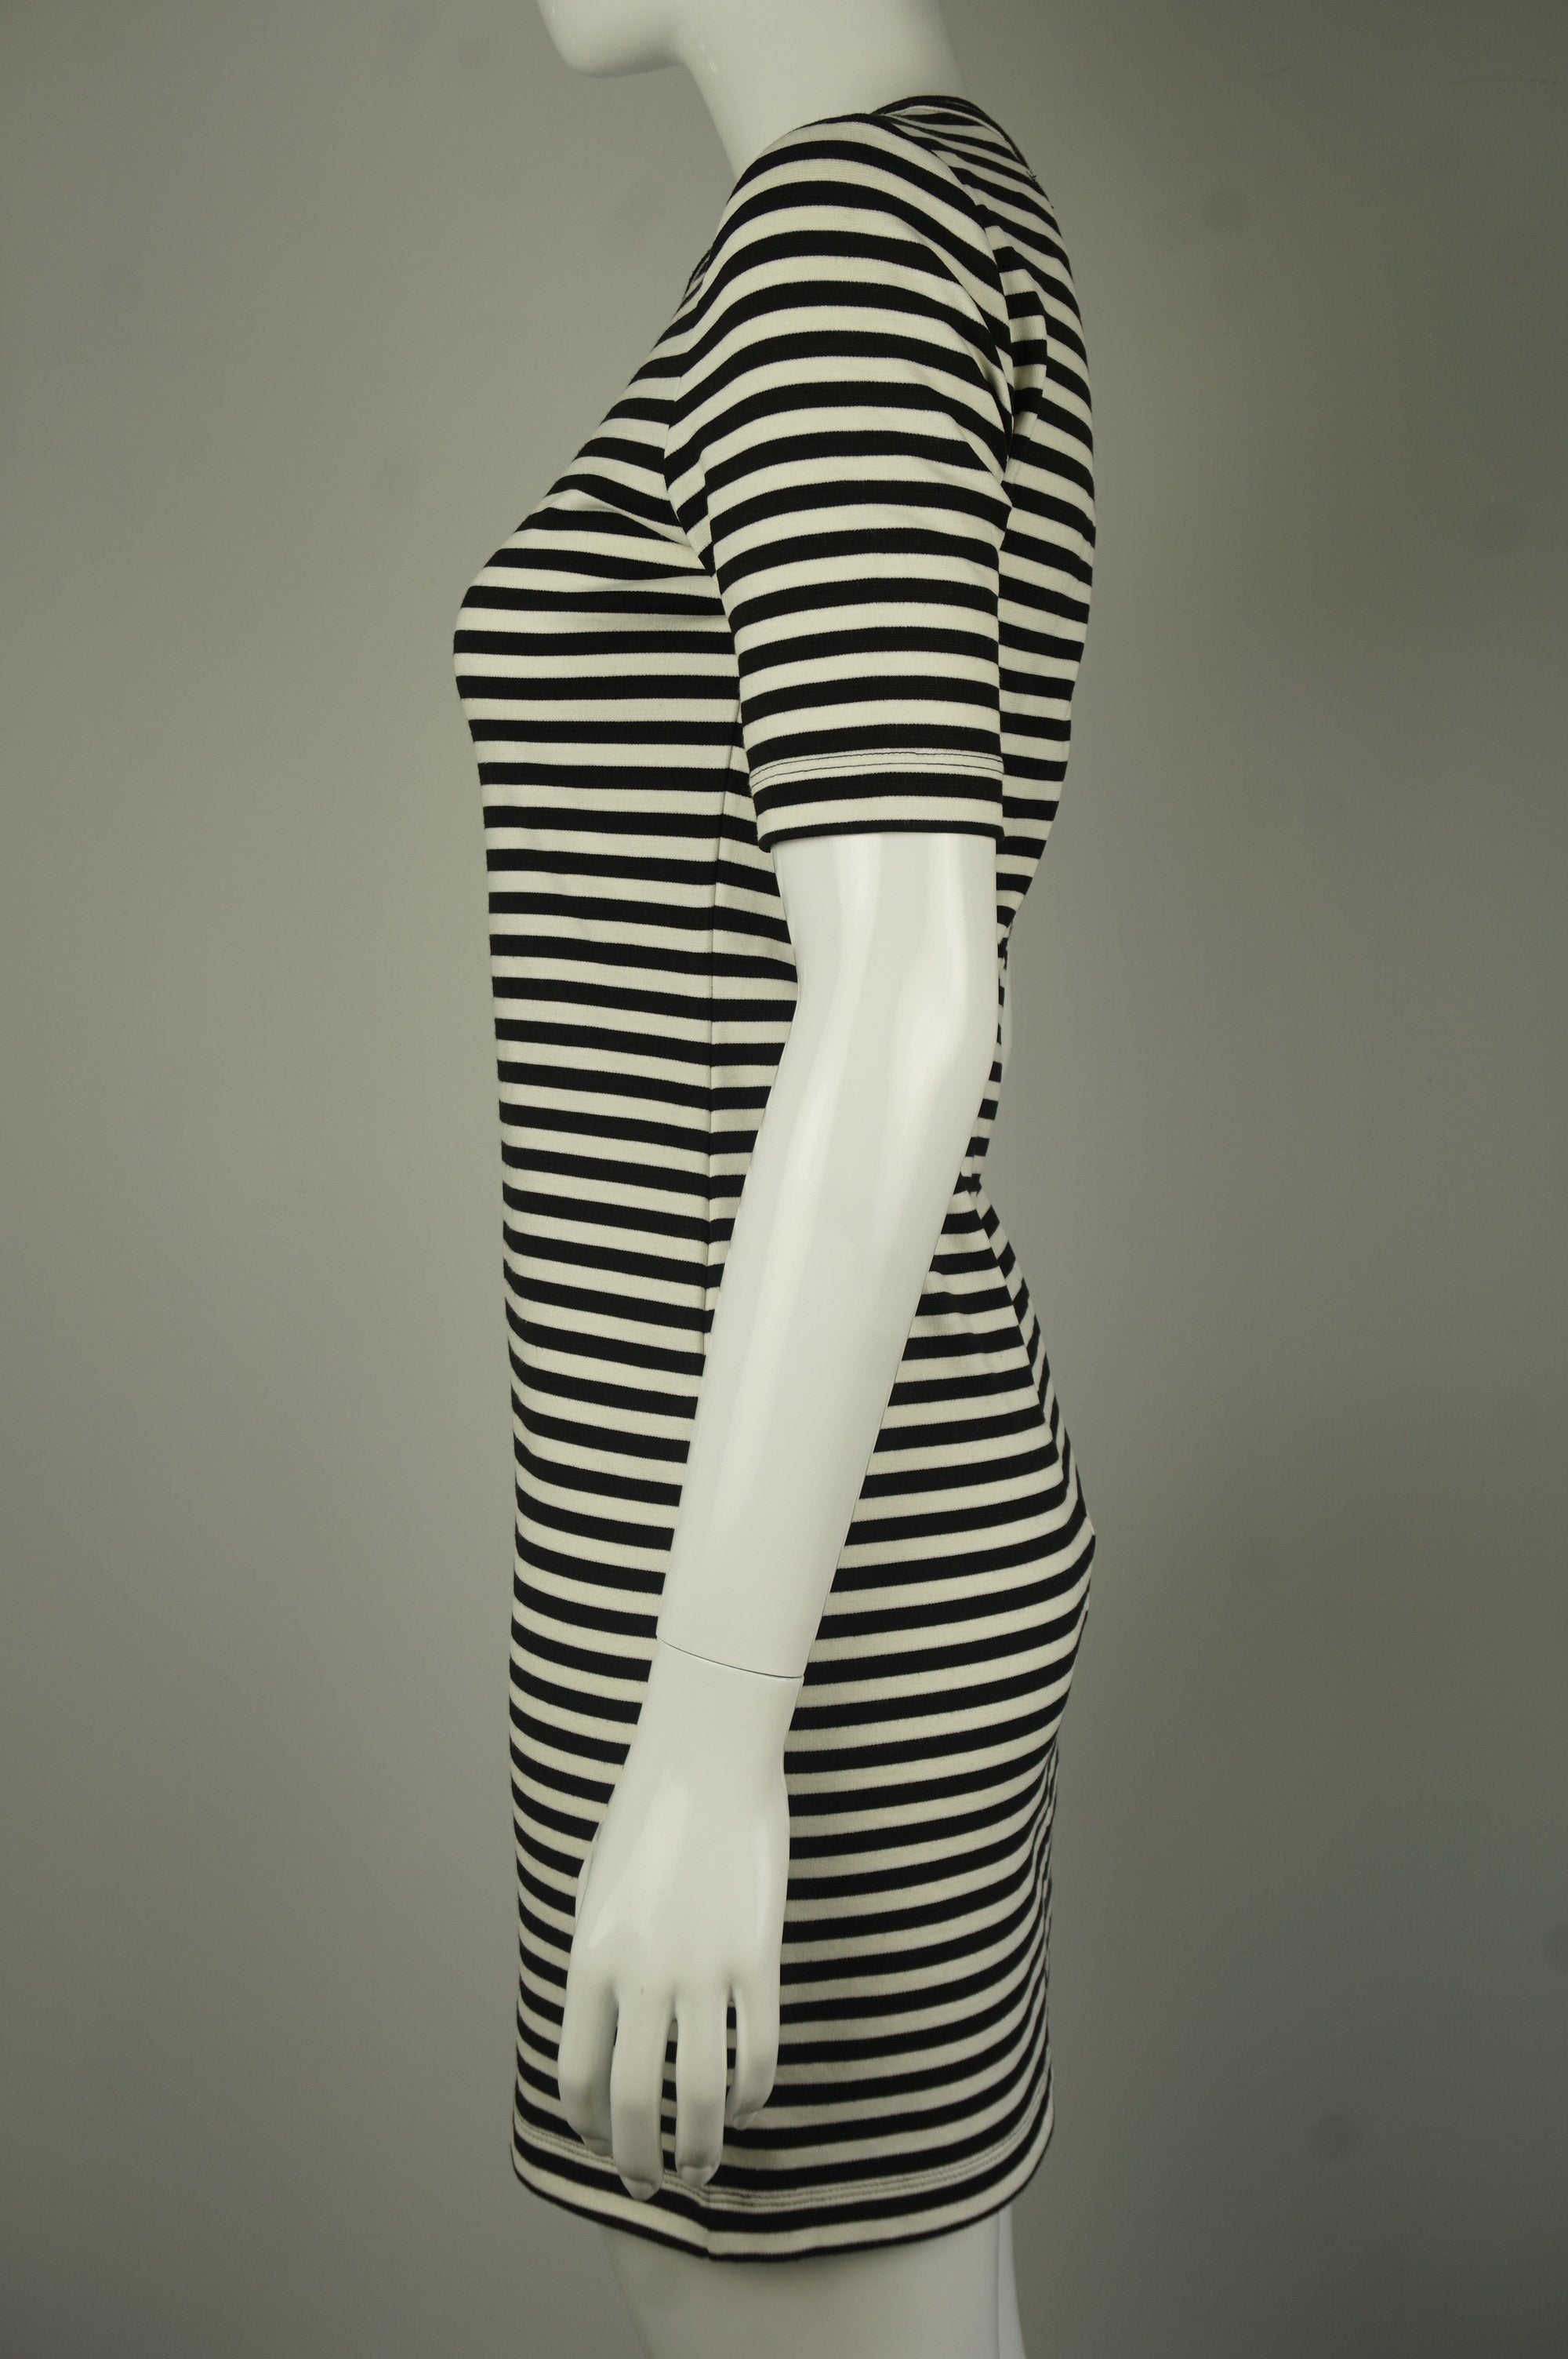 Sunday Best Black and White Stripped Dress, Super comfortable stripped dress, add a pair of sneakers and you are ready to tackle the day!, Black, White, 62% Rayon, 34% Polyester, 4% Spandex, women's Dresses & Skirts, women's Black, White Dresses & Skirts, Sunday Best women's Dresses & Skirts, Sunday best women's dress, aritzia women's dress, 